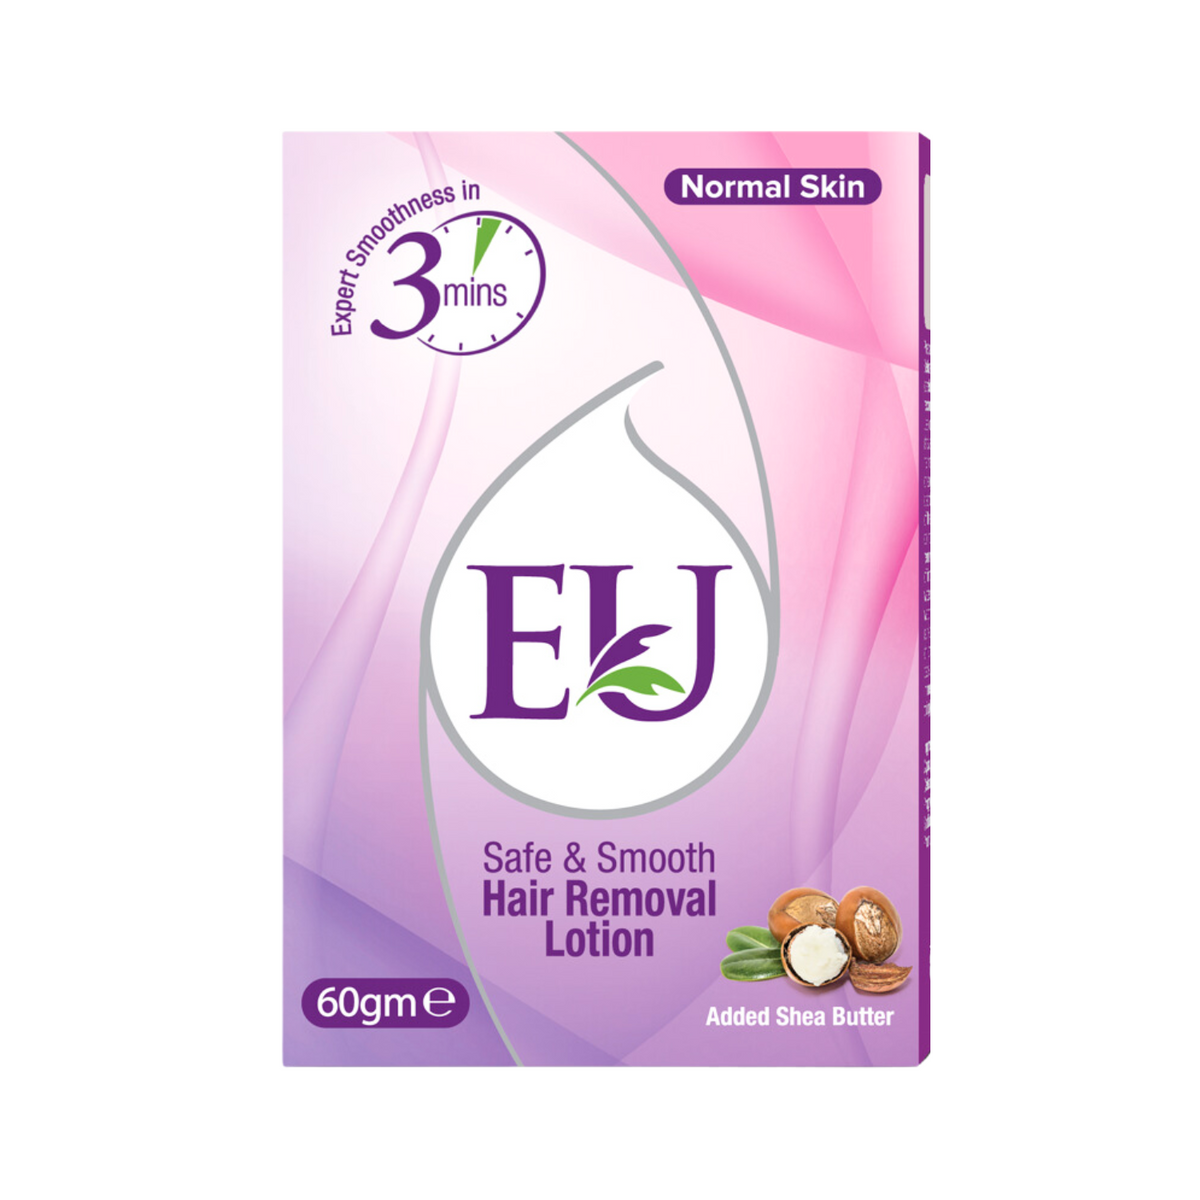 eu-safe-smooth-normal-skin-hair-removal-lotion-60g